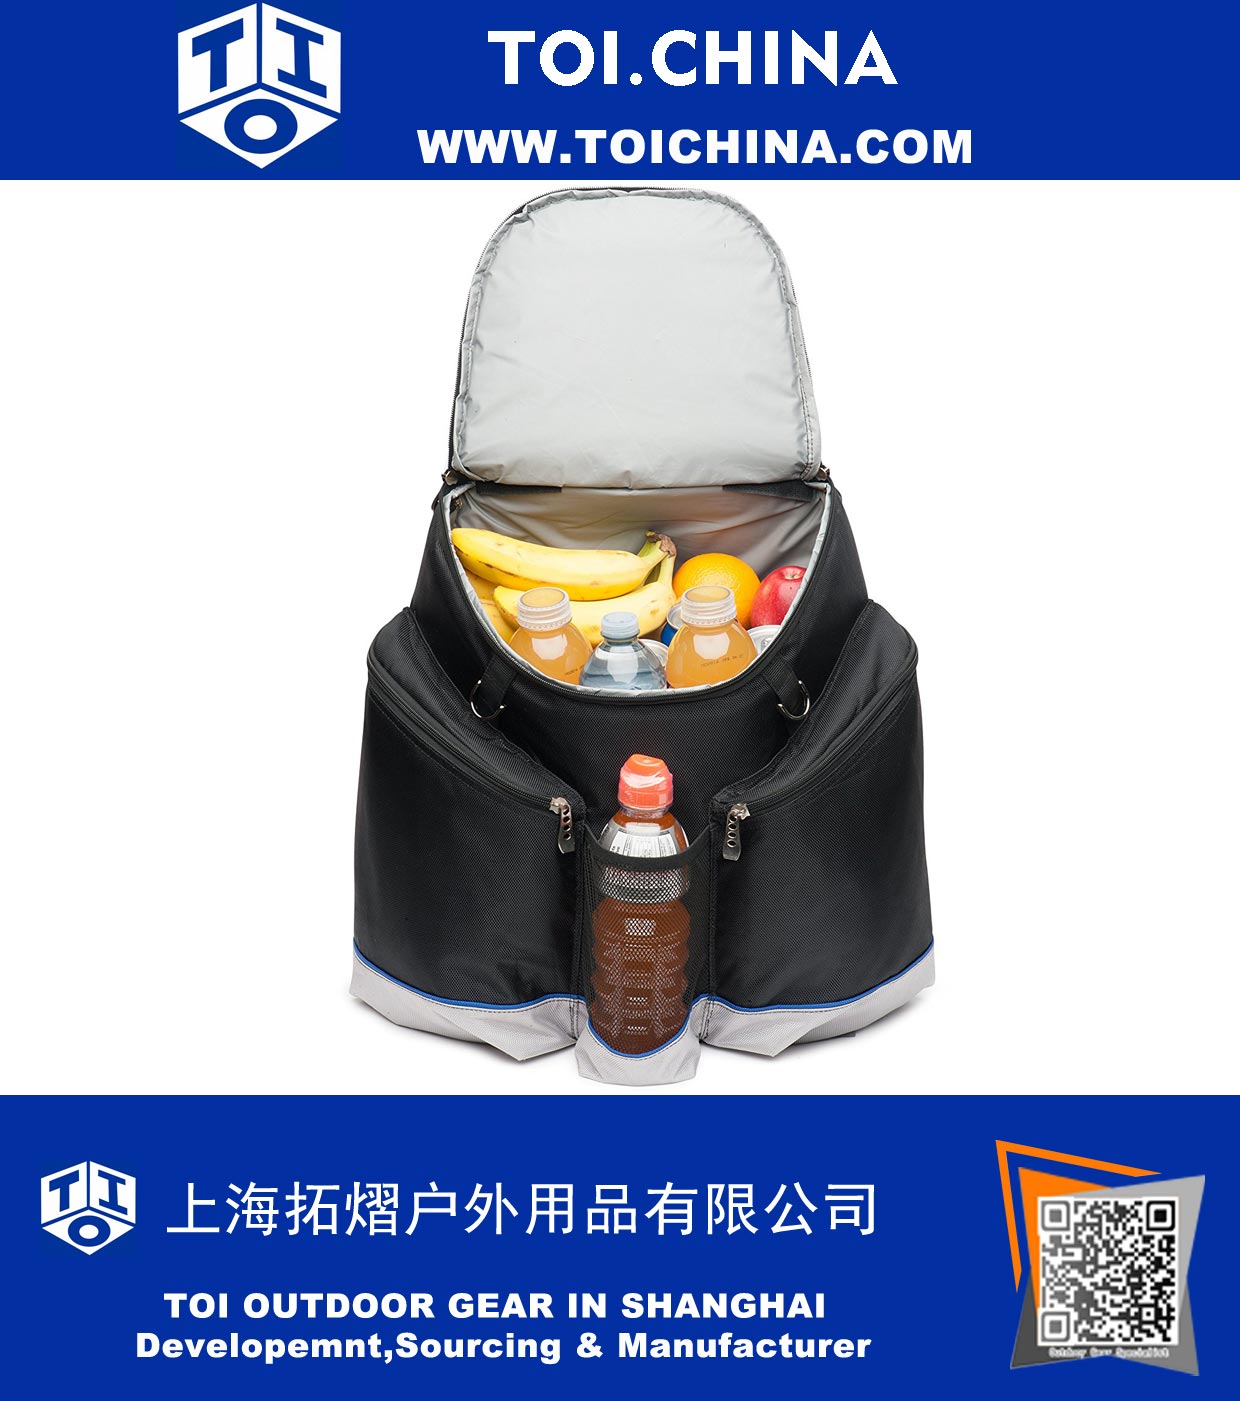 Cooler Backpack Made of Heavy Duty 1680D Tear Resistent Fabric, High Density Thick Foam Insulation, Heat Sealed Removable Thick Peva Liner, Large Padded Pockets and Strong Zippers and Stitching